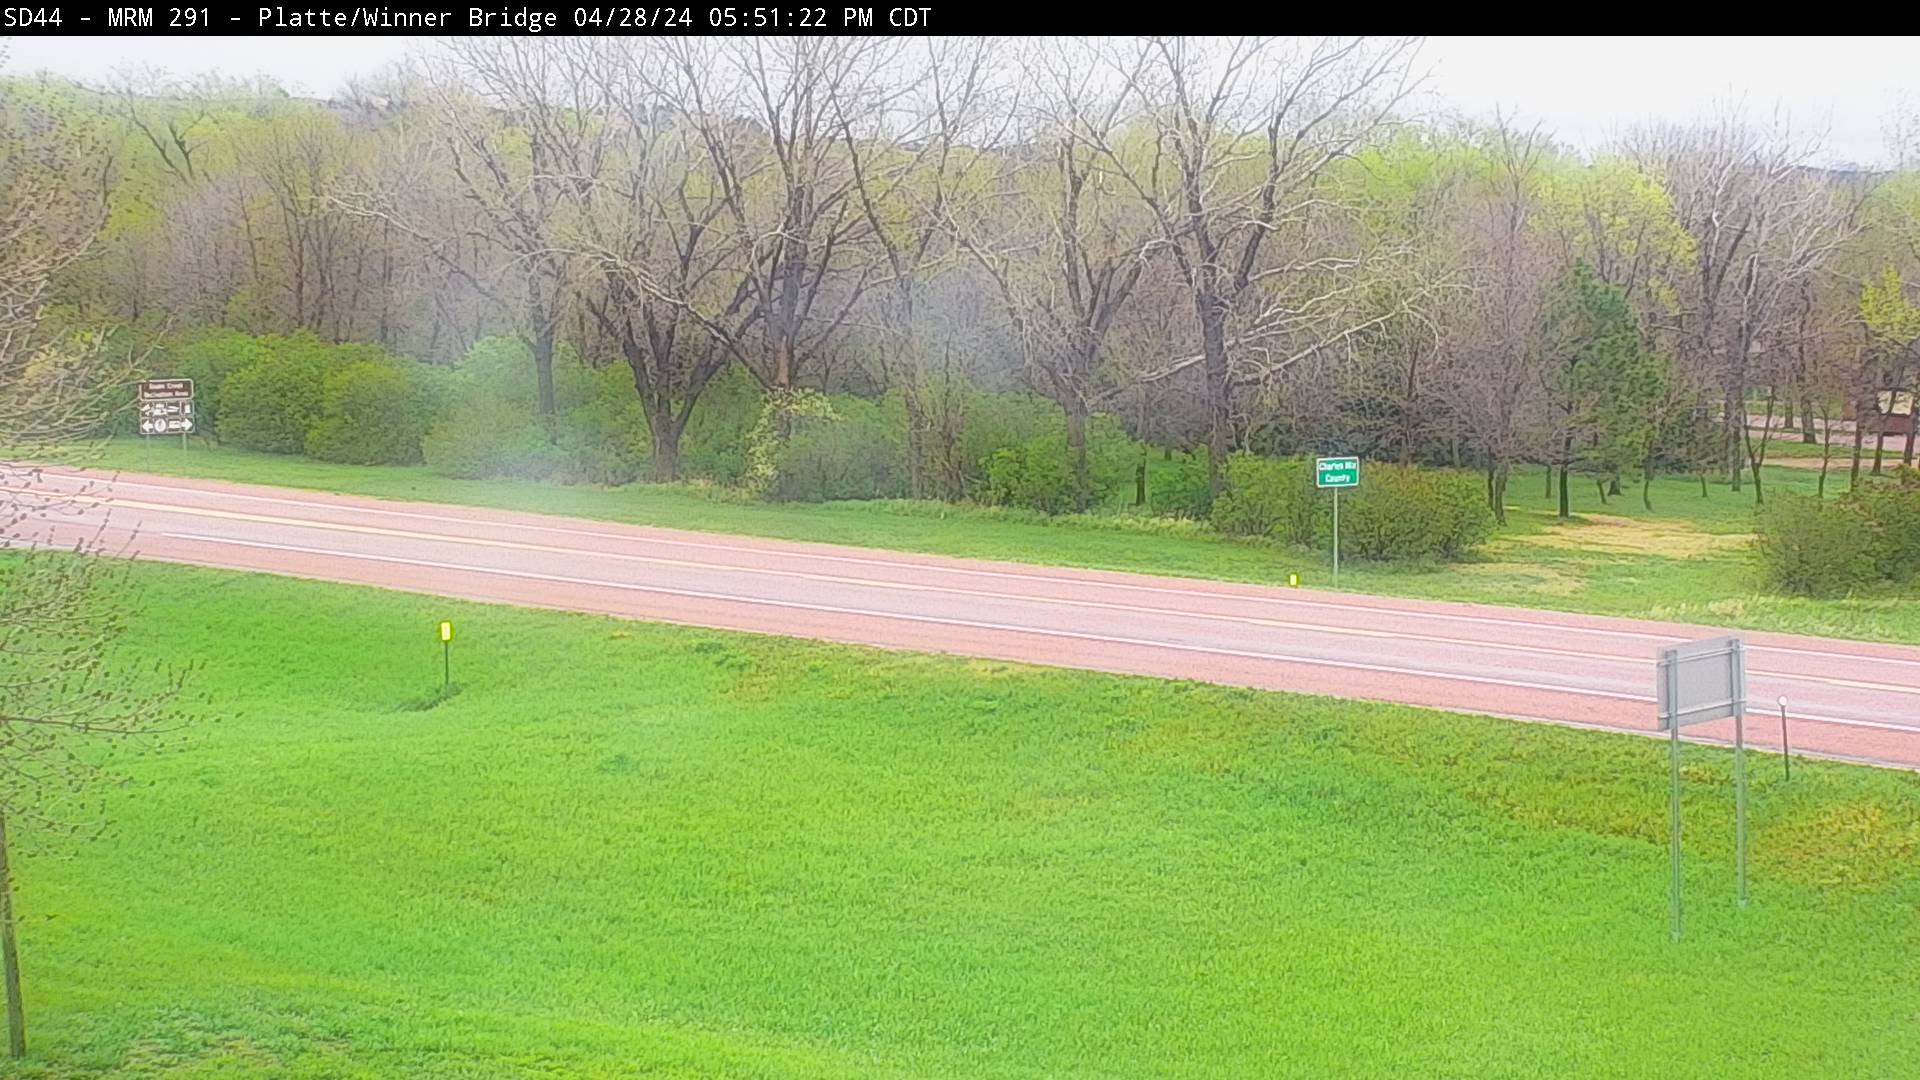 Traffic Cam West of town along SD-44 @ MP 291.6 - East Player